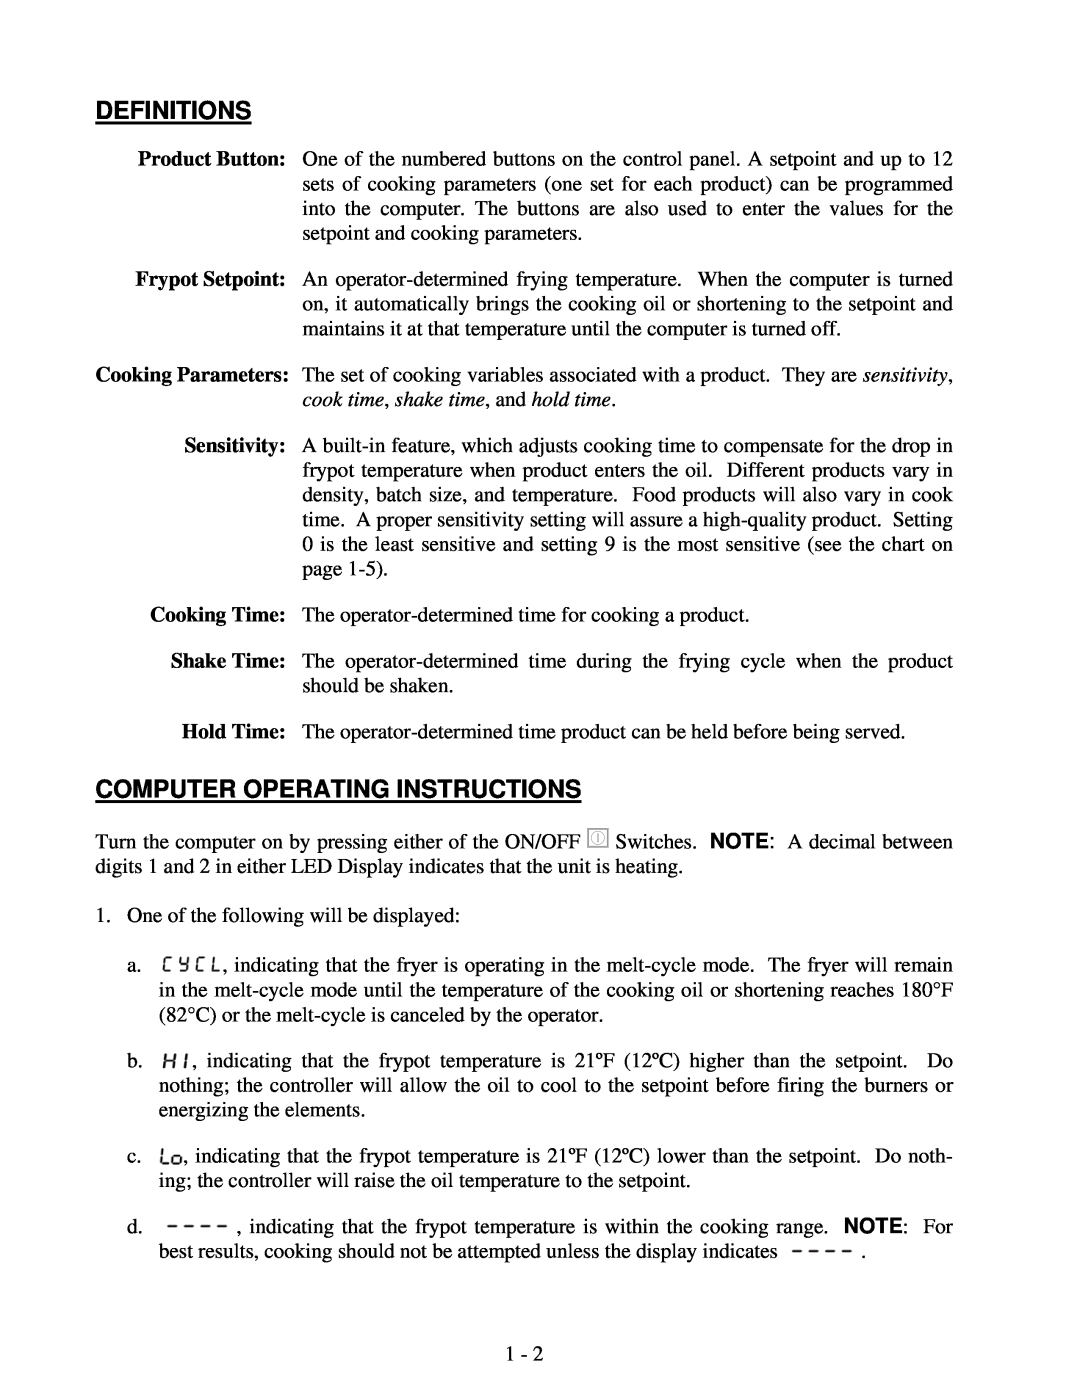 Frymaster 8195916 user manual Definitions, Computer Operating Instructions 